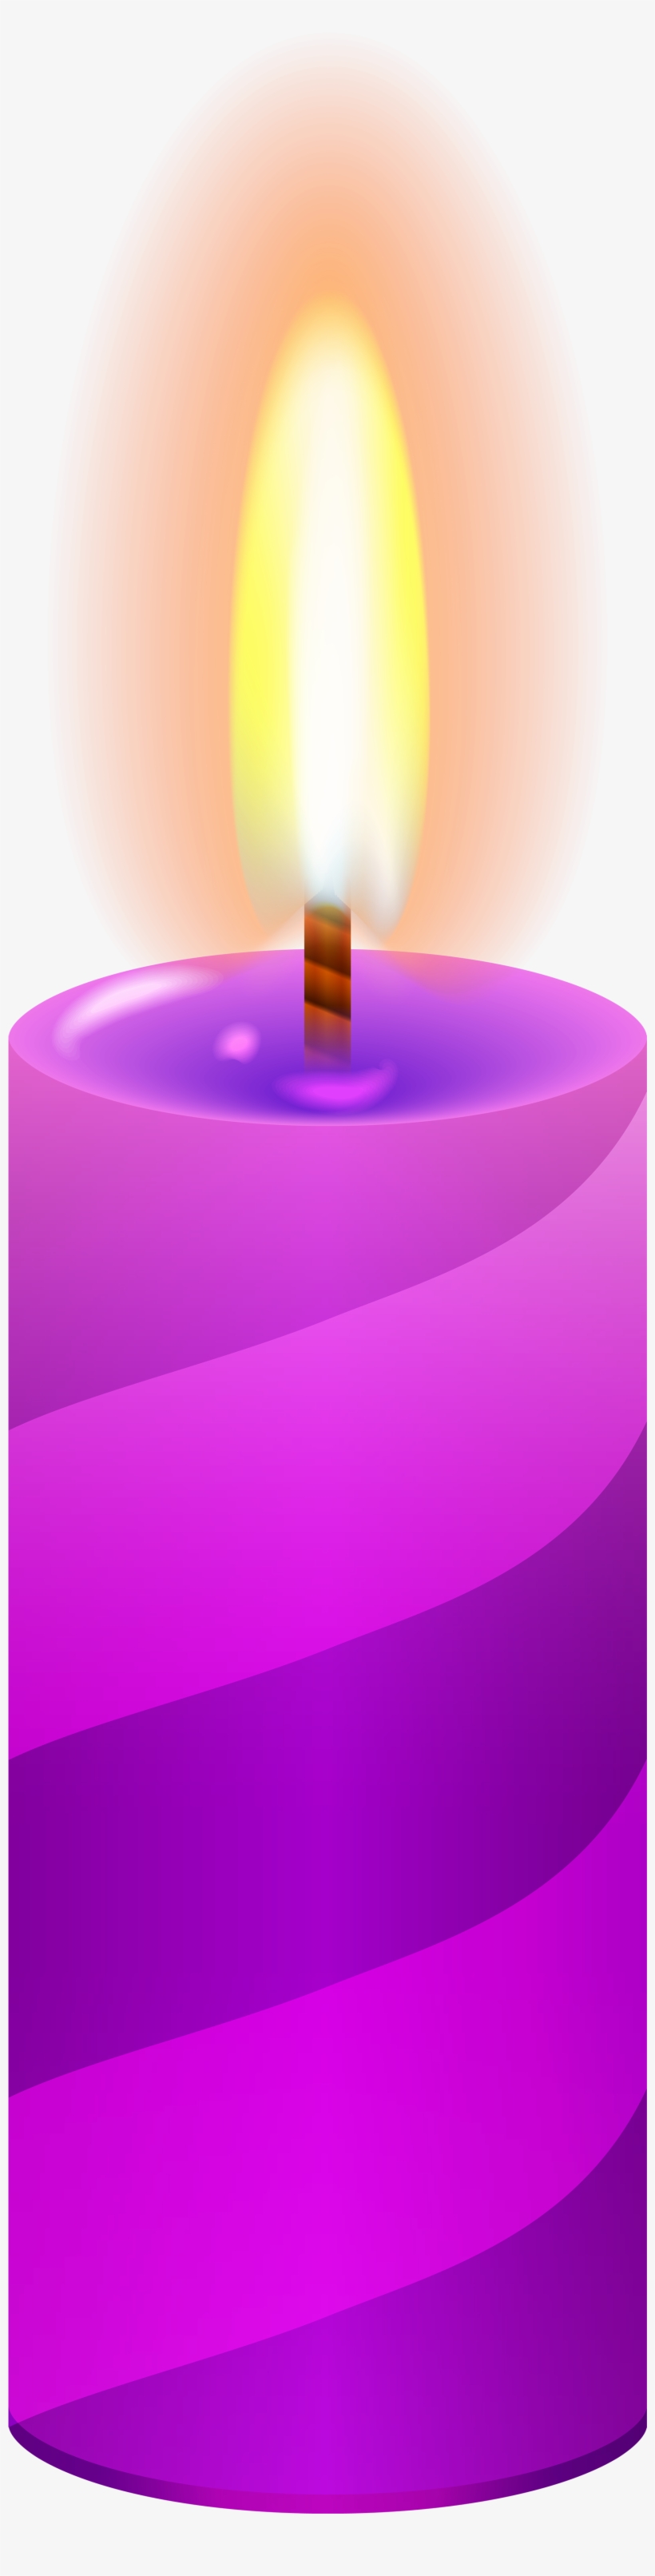 Candle Purple Png Clip Art - Pink Candles Png, transparent png #216389